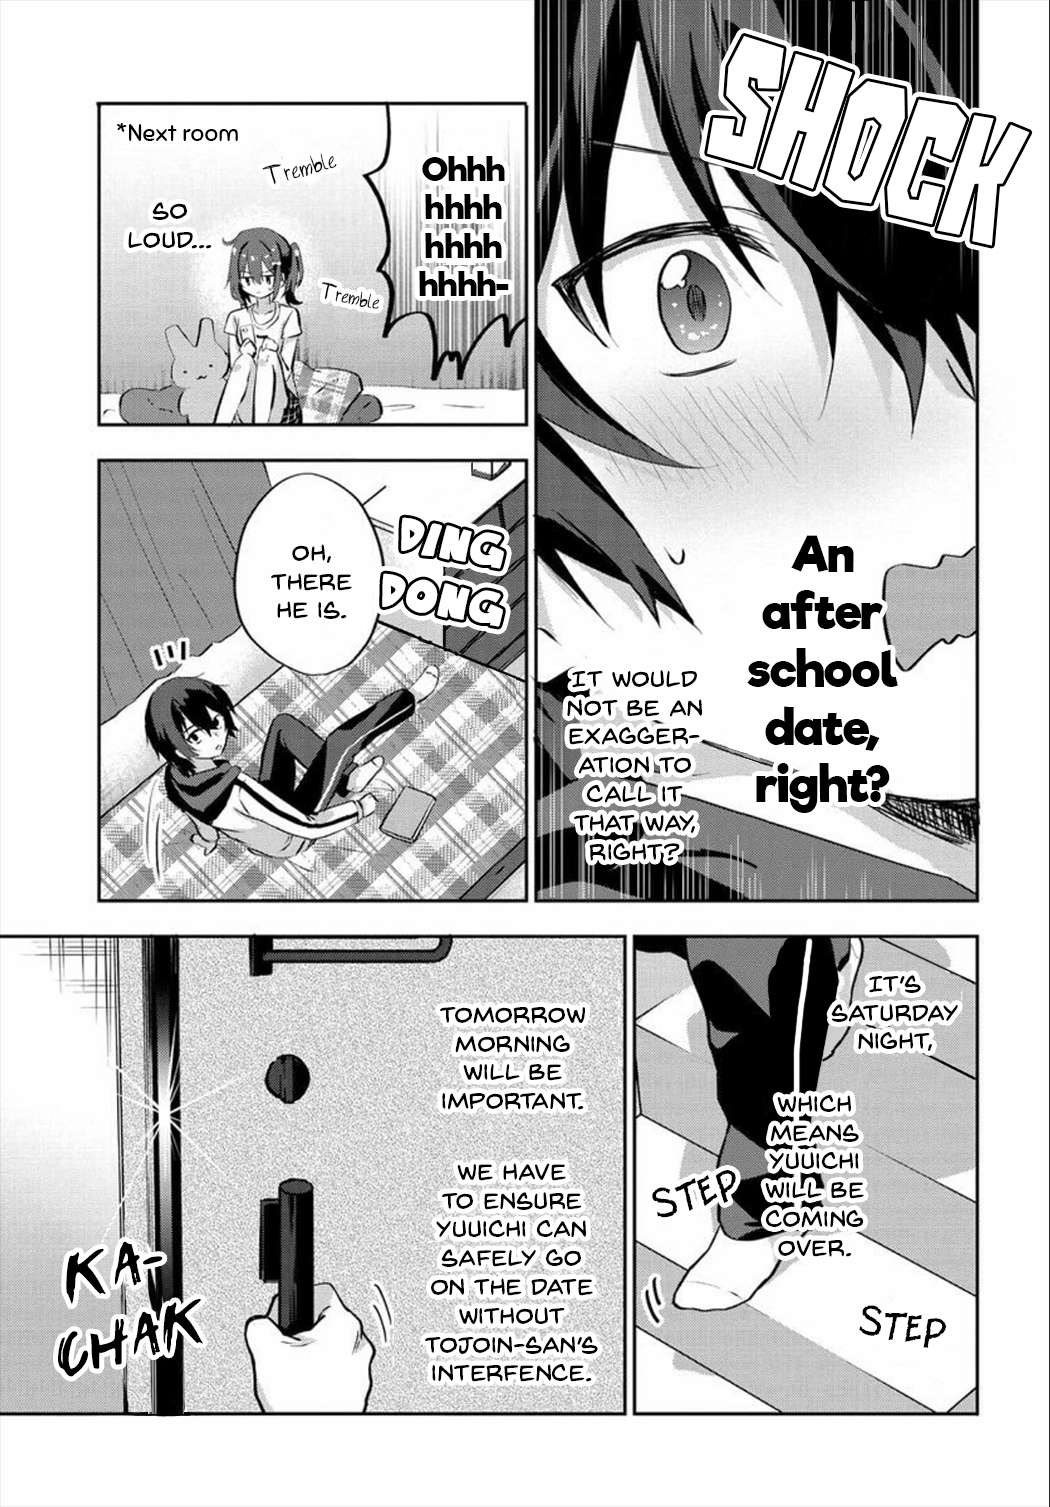 Since I’Ve Entered The World Of Romantic Comedy Manga, I’Ll Do My Best To Make The Losing Heroine Happy - chapter 5.2 - #5